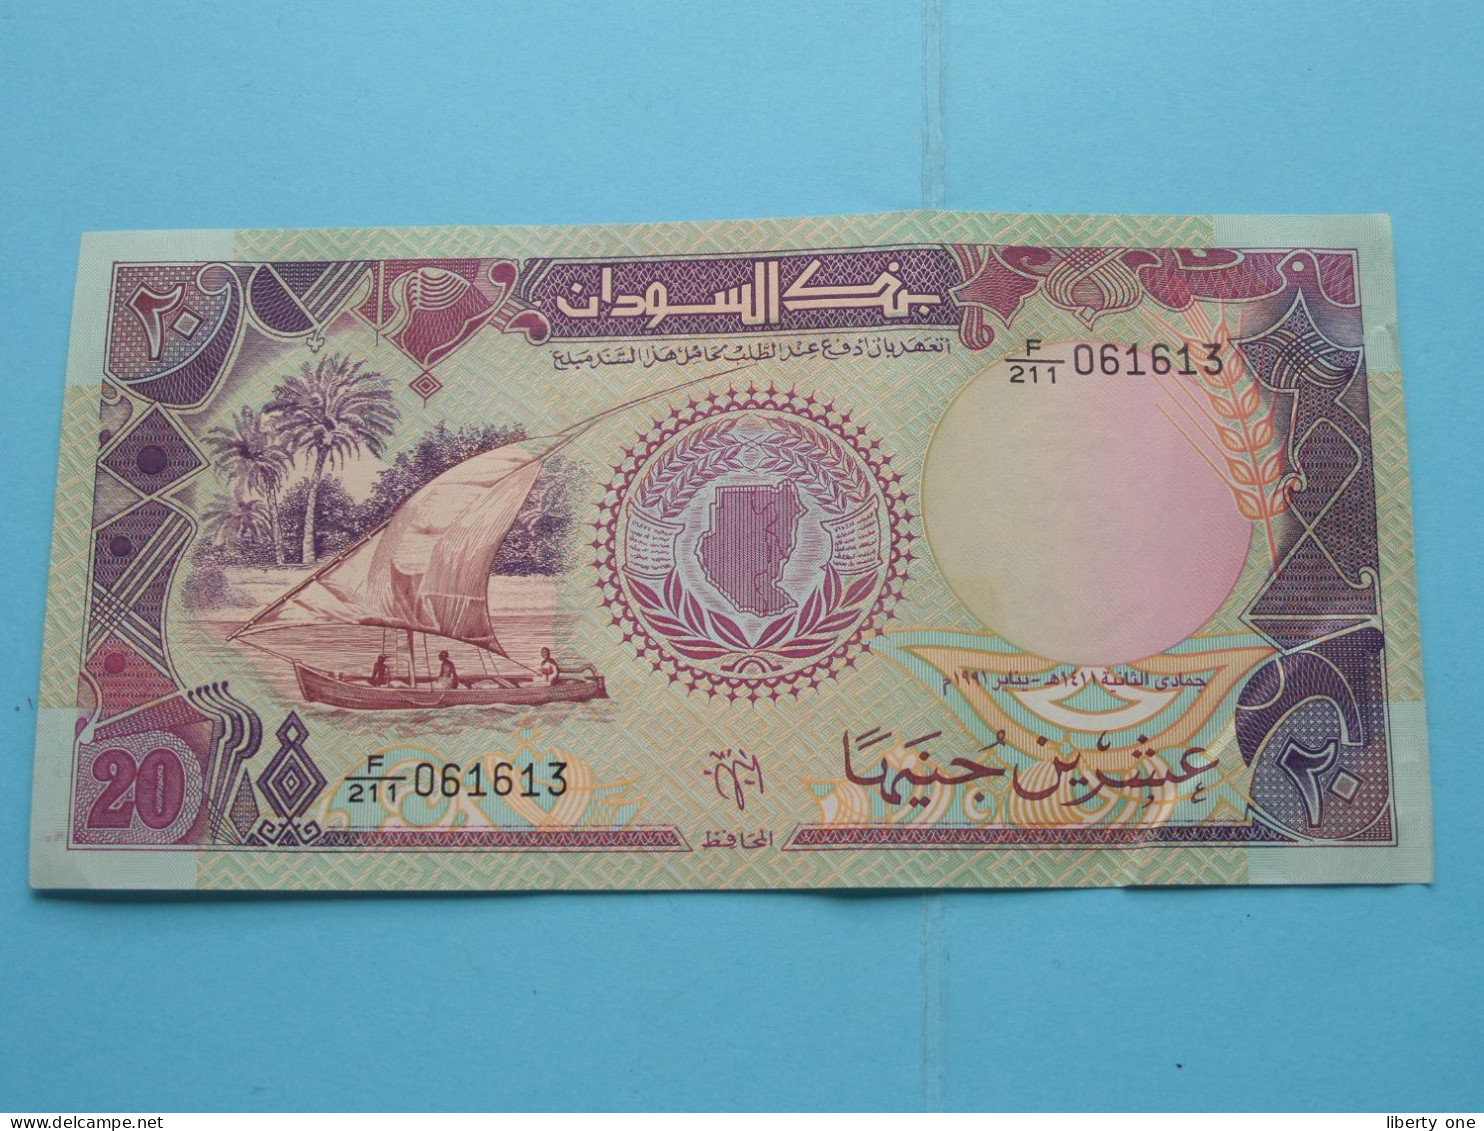 20 Sudanese Pounds ( F/211 061613 ) Bank Of SUDAN () 1991 ( For Grade See SCAN ) XF ! - Sudan